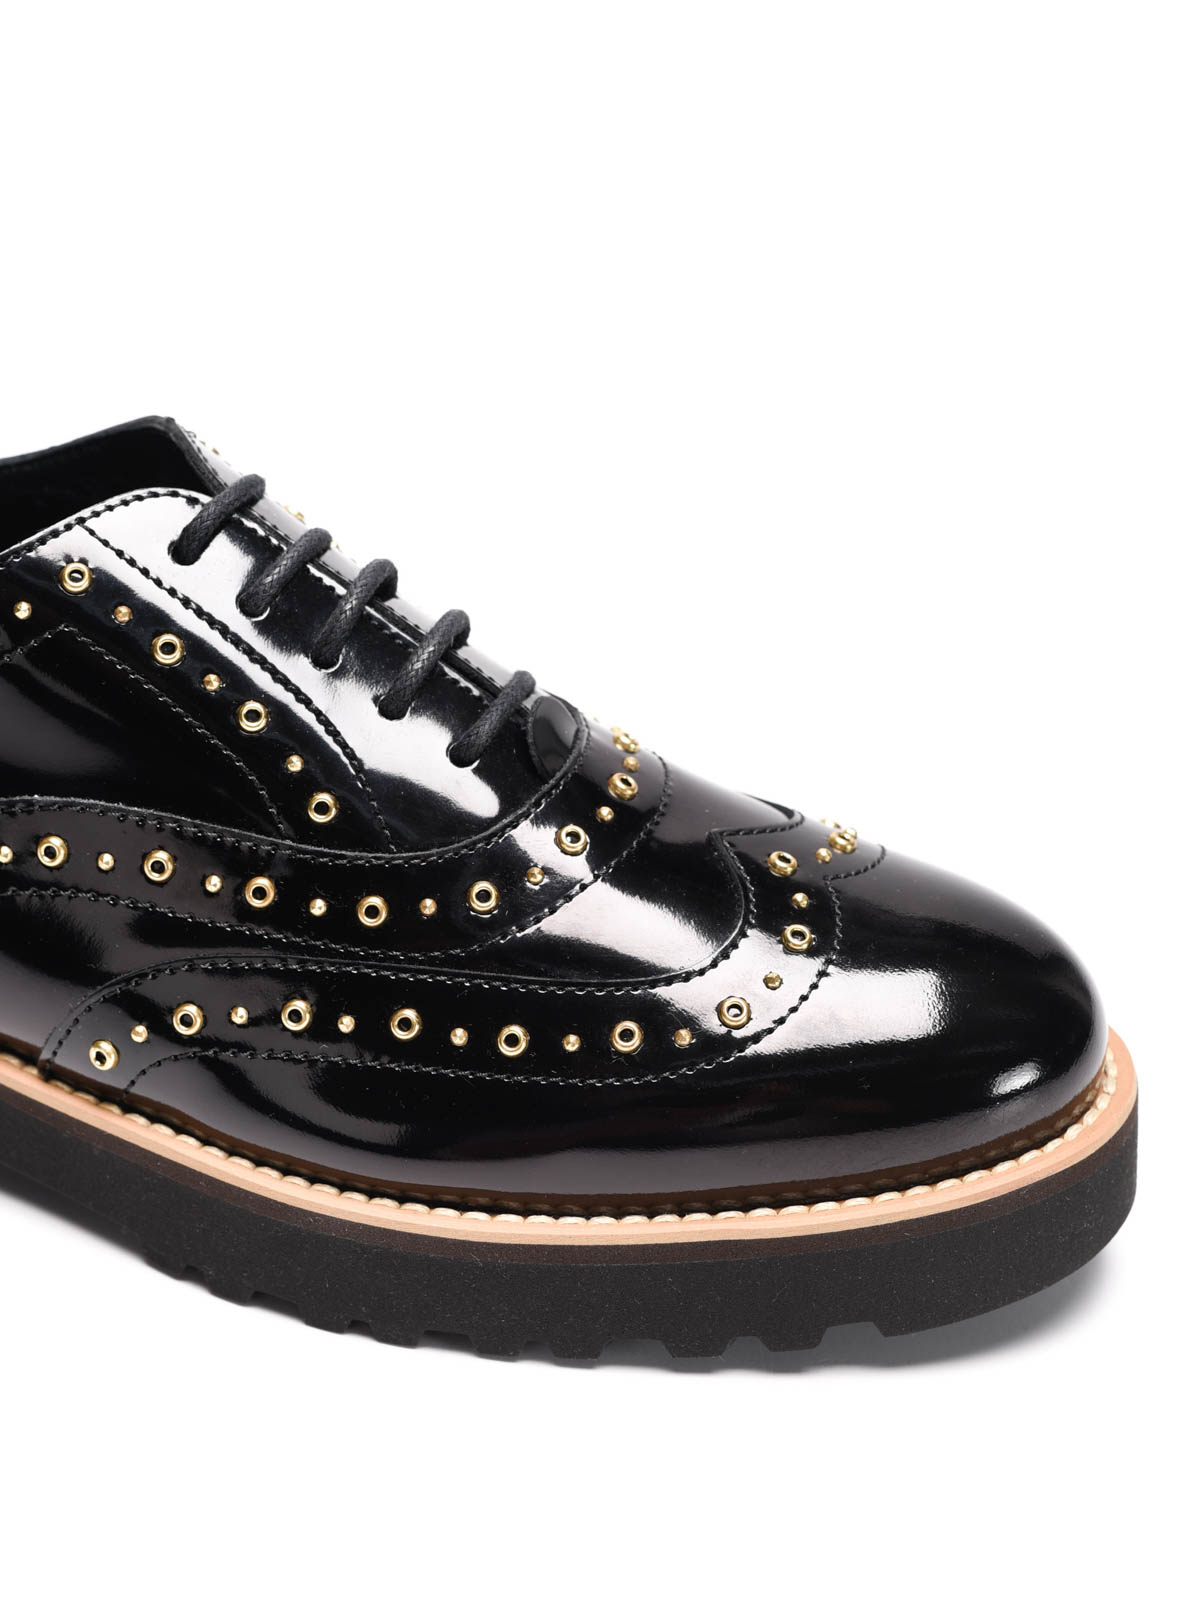 studded oxford shoes